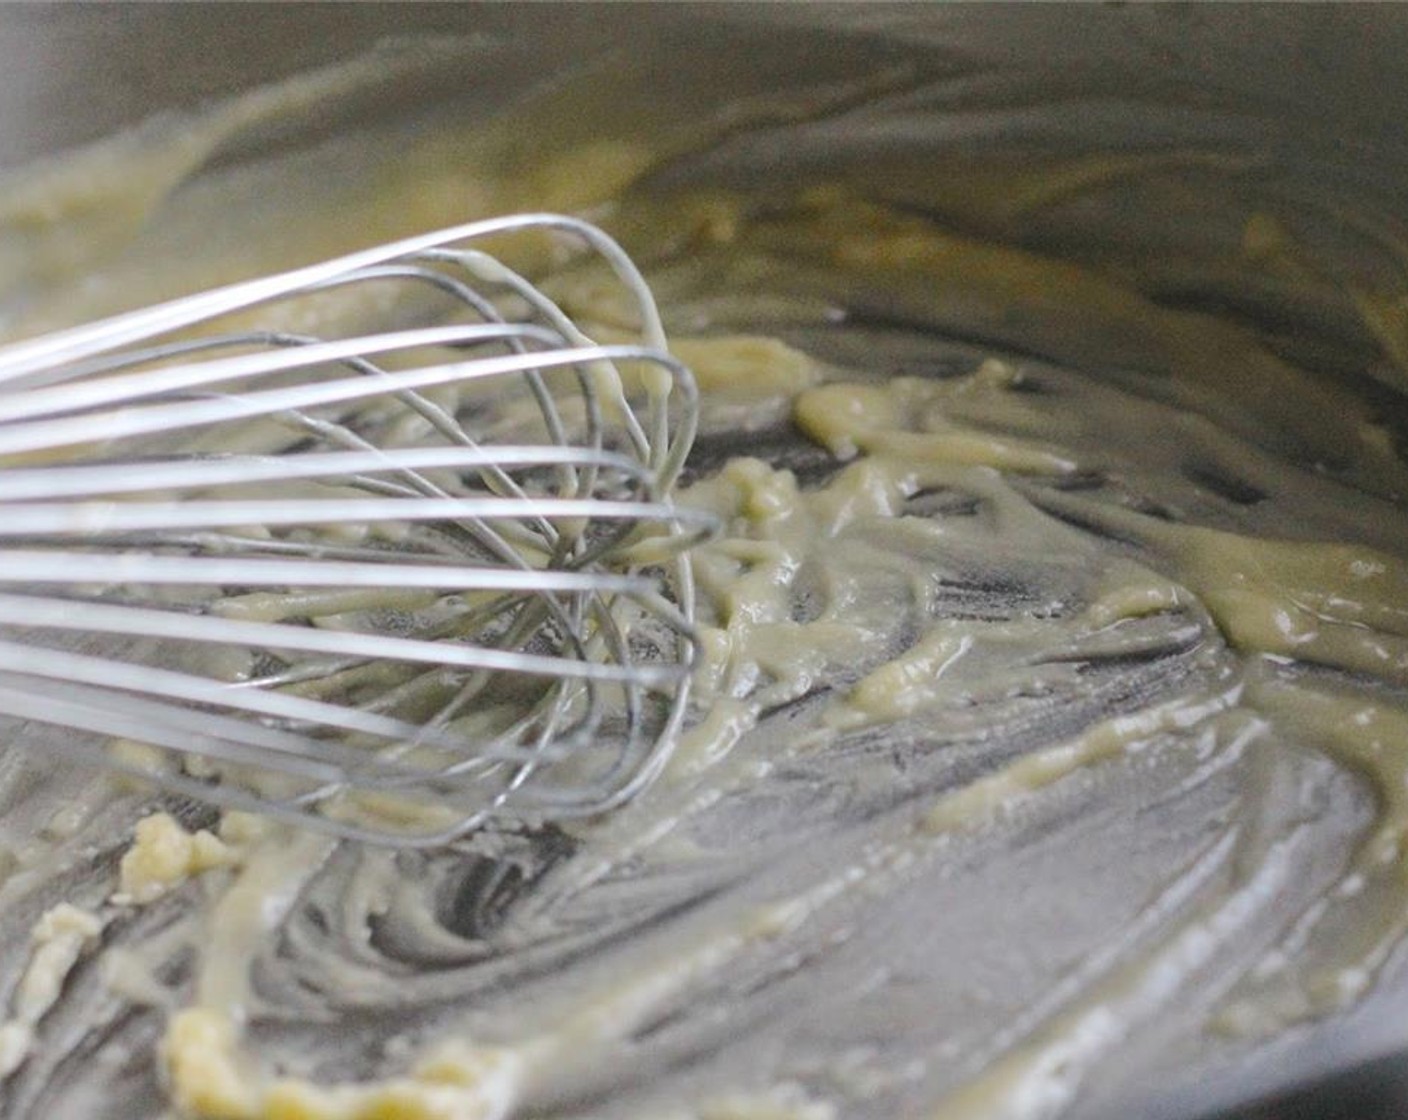 step 13 Now prepare the Mornay Sauce by melting the Butter (3 Tbsp) and whisking in the All-Purpose Flour (2 Tbsp).